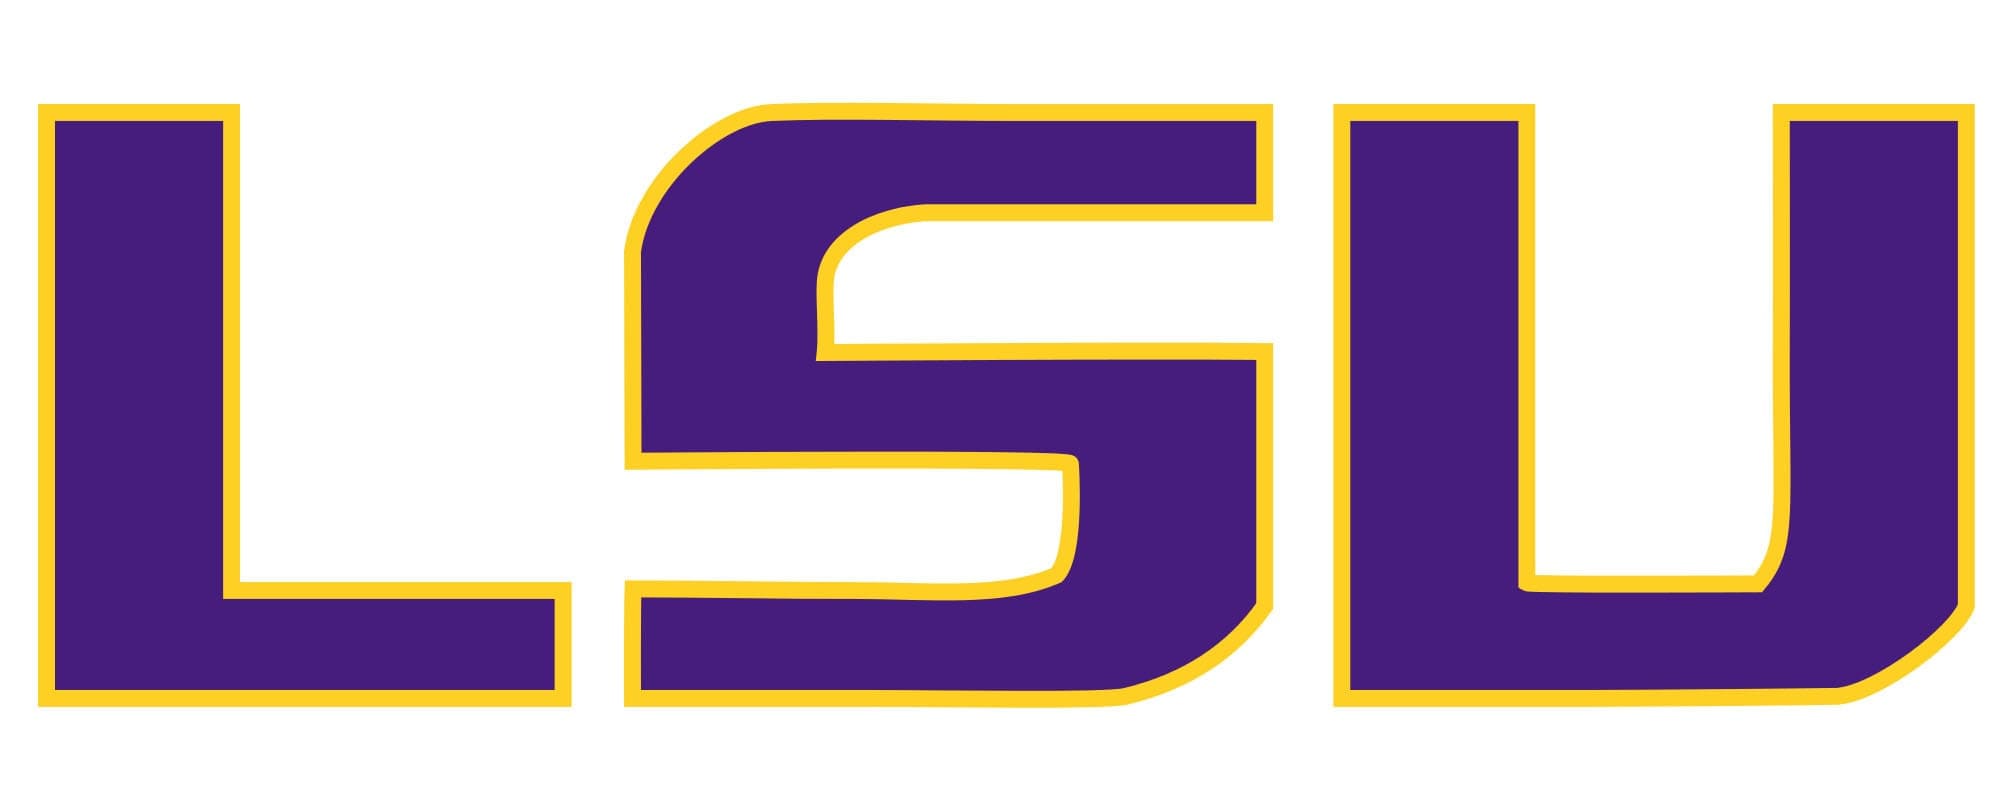 LSU Tigers Logo and symbol, meaning, history, PNG, brand